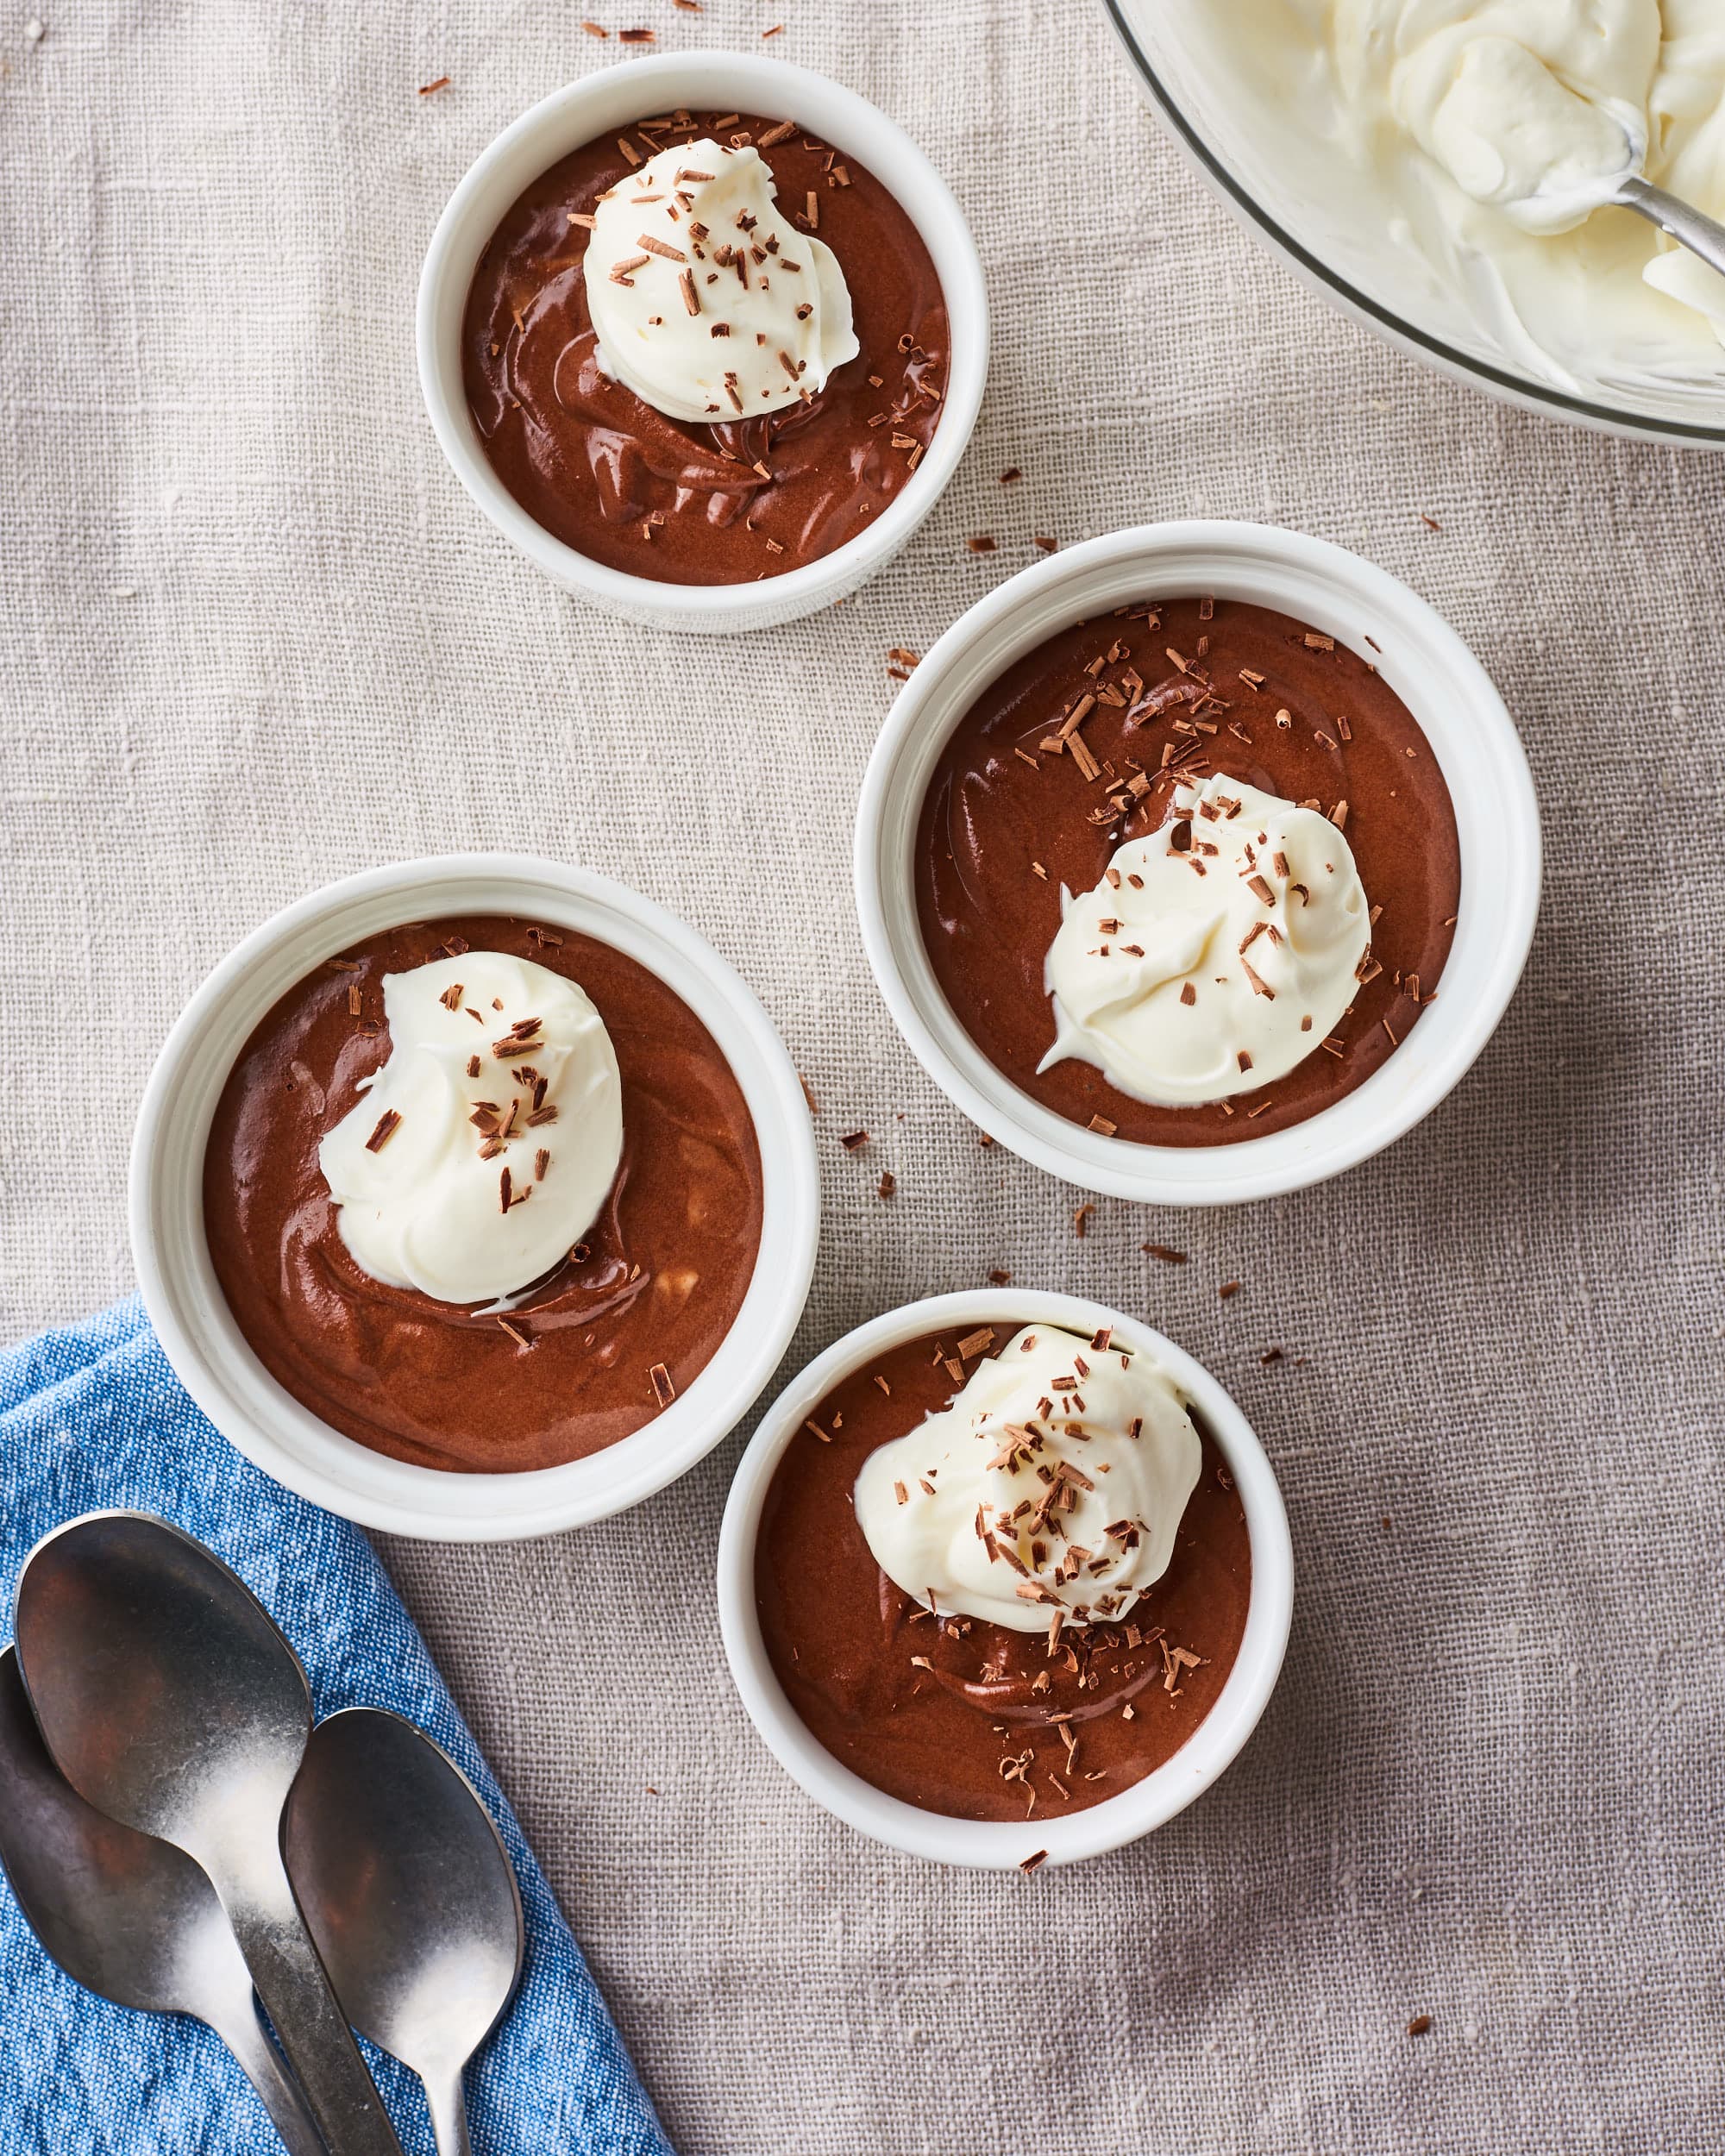 How To Make Easy Chocolate Mousse   Kitchn